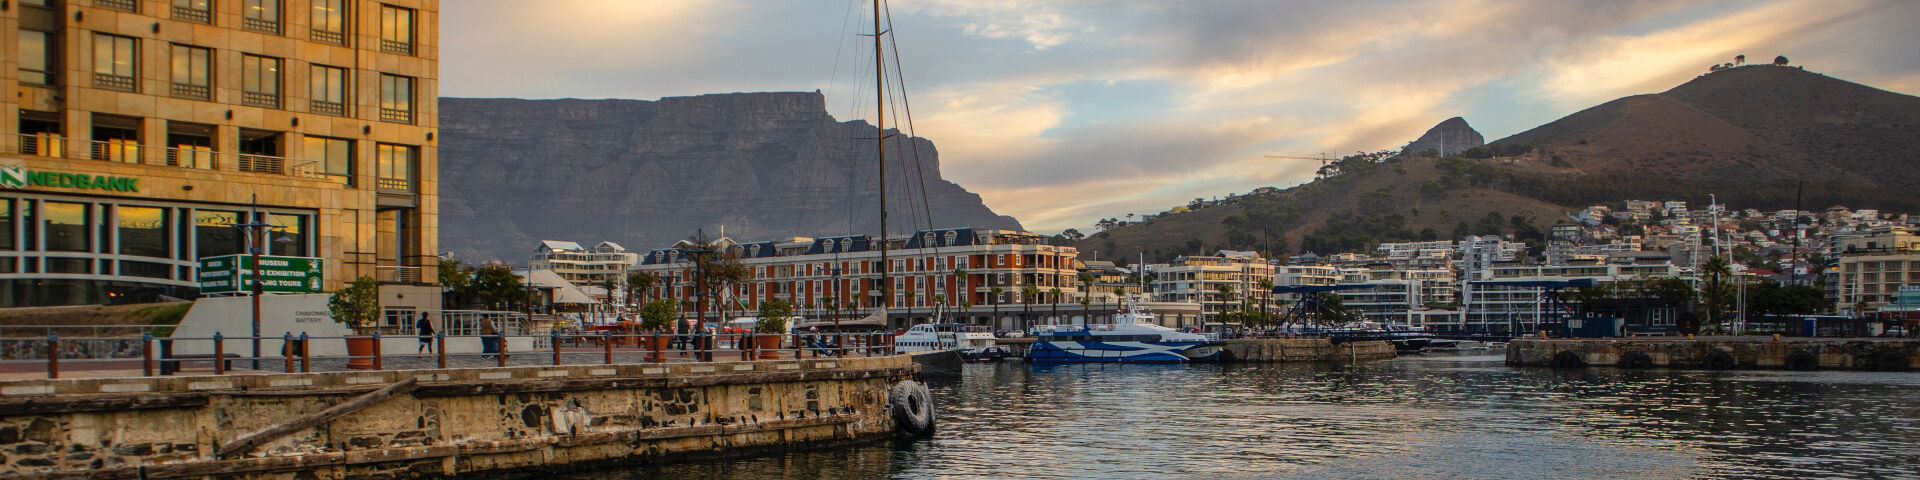 Waterfront - Cape Town - Table Mountain - South Africa